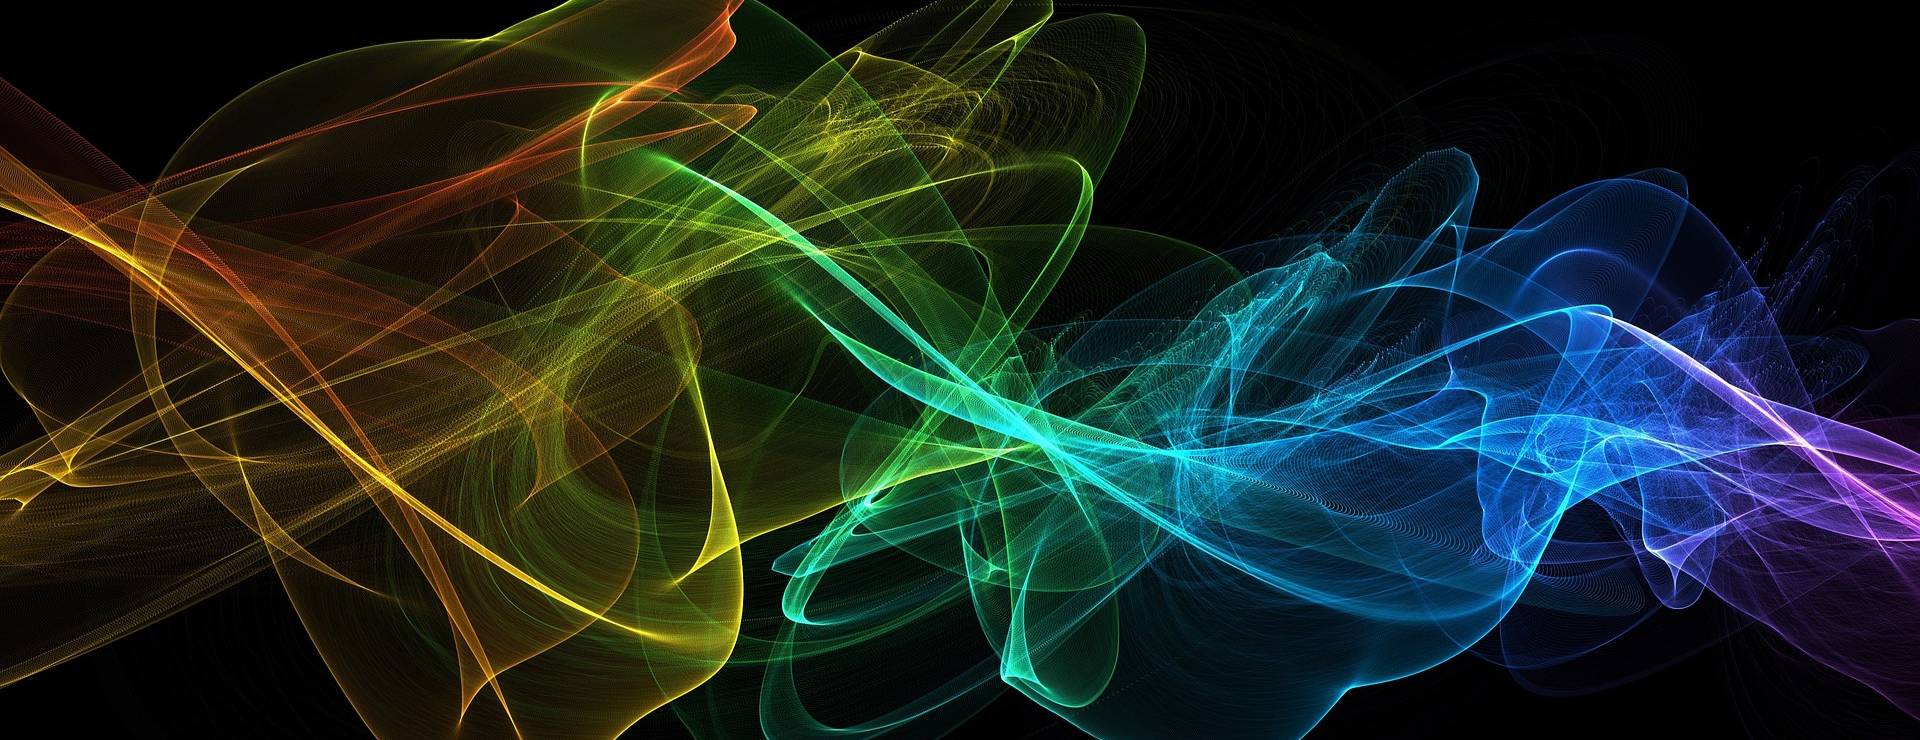 A colorful picture of swirling lights in the dark.